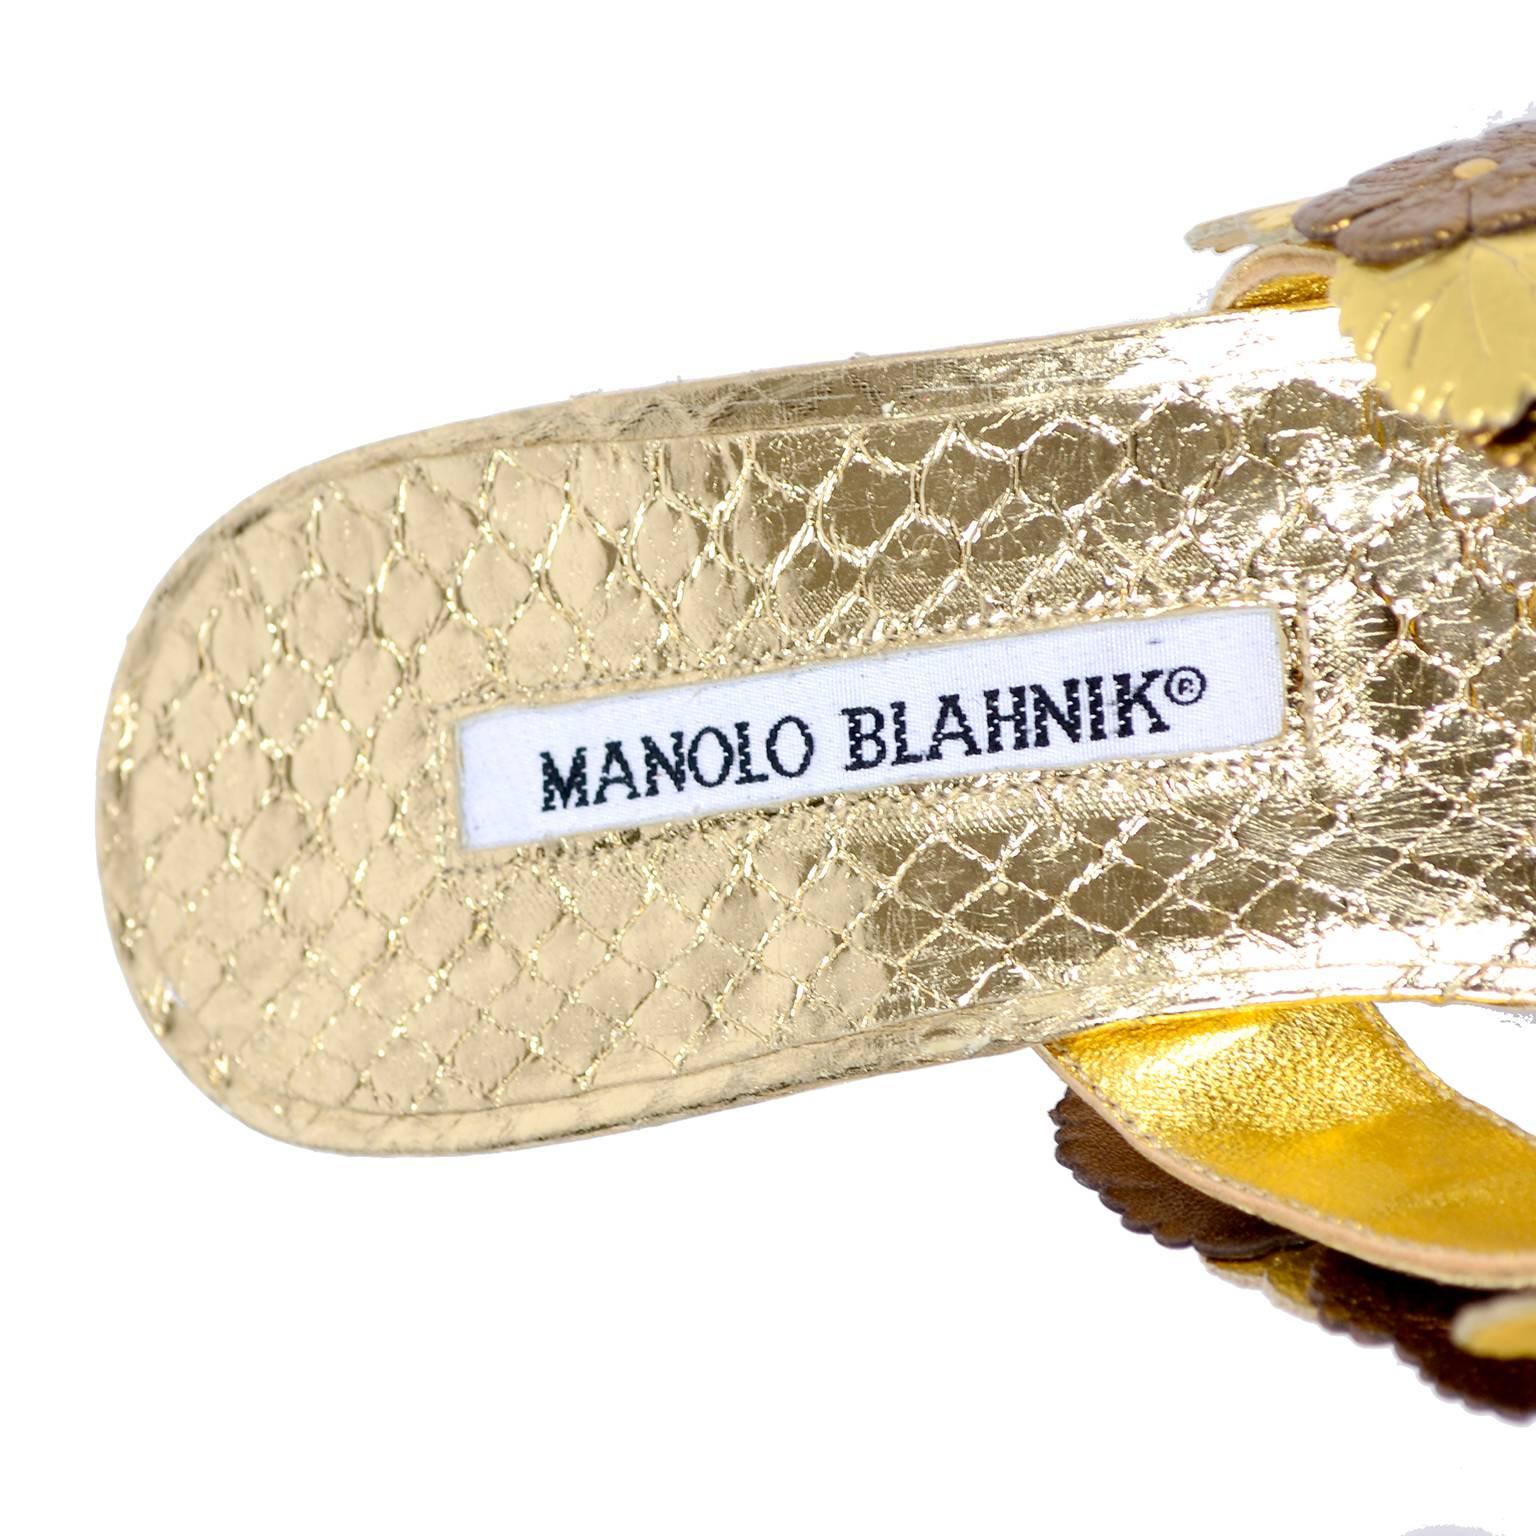 Manolo Blahnik Metallic Gold Reptile Embossed Leather Sandals With Flowers 5